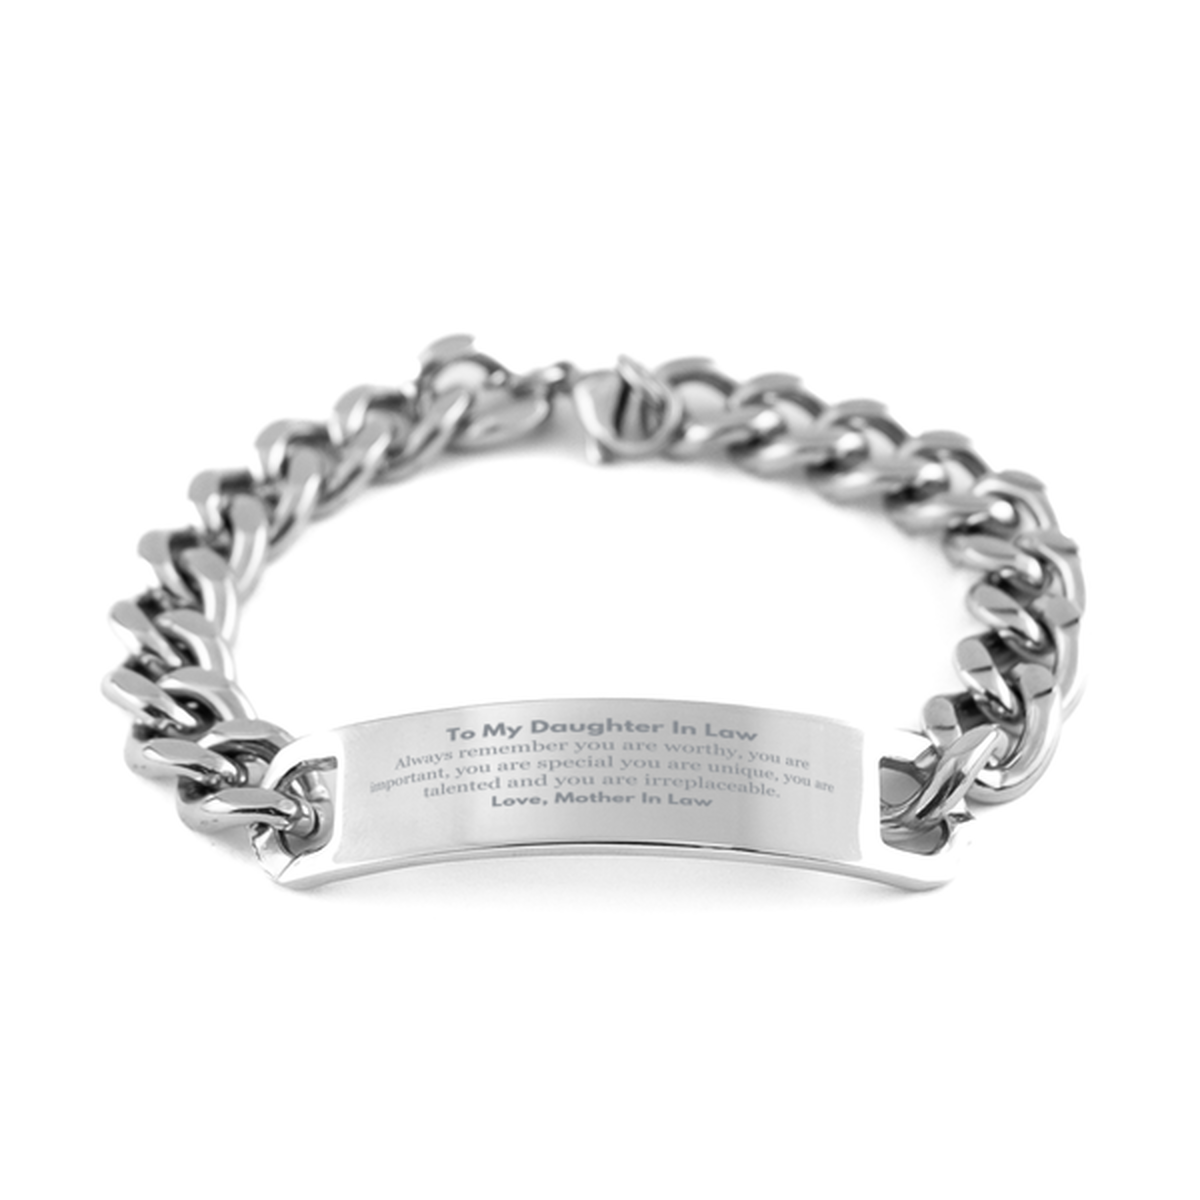 Daughter In Law Birthday Gifts from Mother In Law, Inspirational Cuban Chain Stainless Steel Bracelet for Daughter In Law Christmas Graduation Gifts for Daughter In Law Always remember you are worthy, you are important. Love, Mother In Law